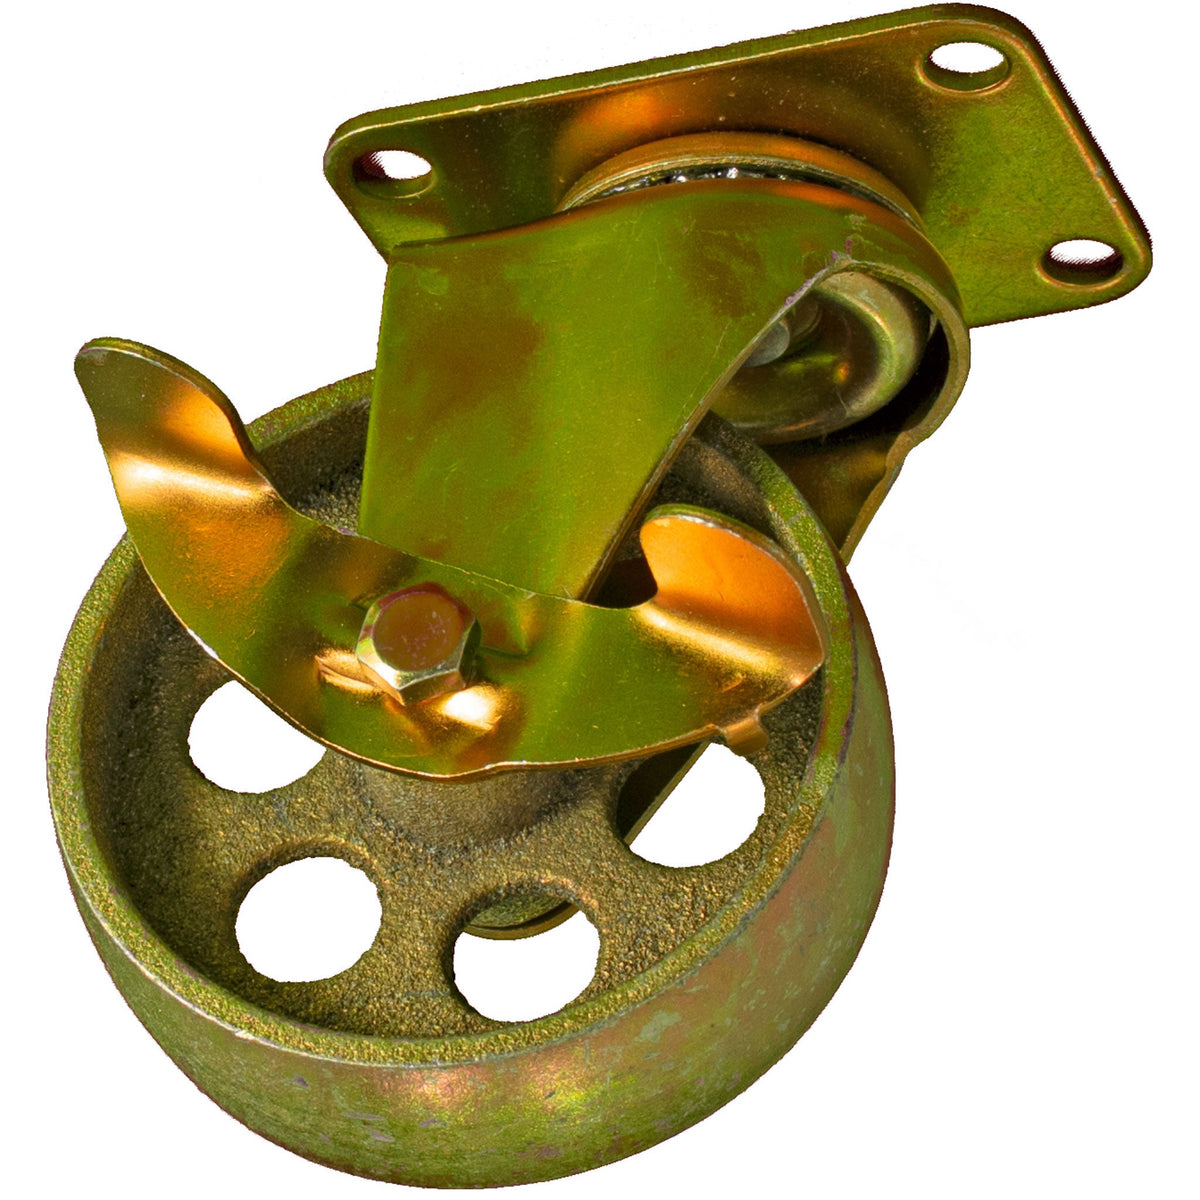 Foot Locking Brake - Swivel Casters come with a brake to lock the wheels in place